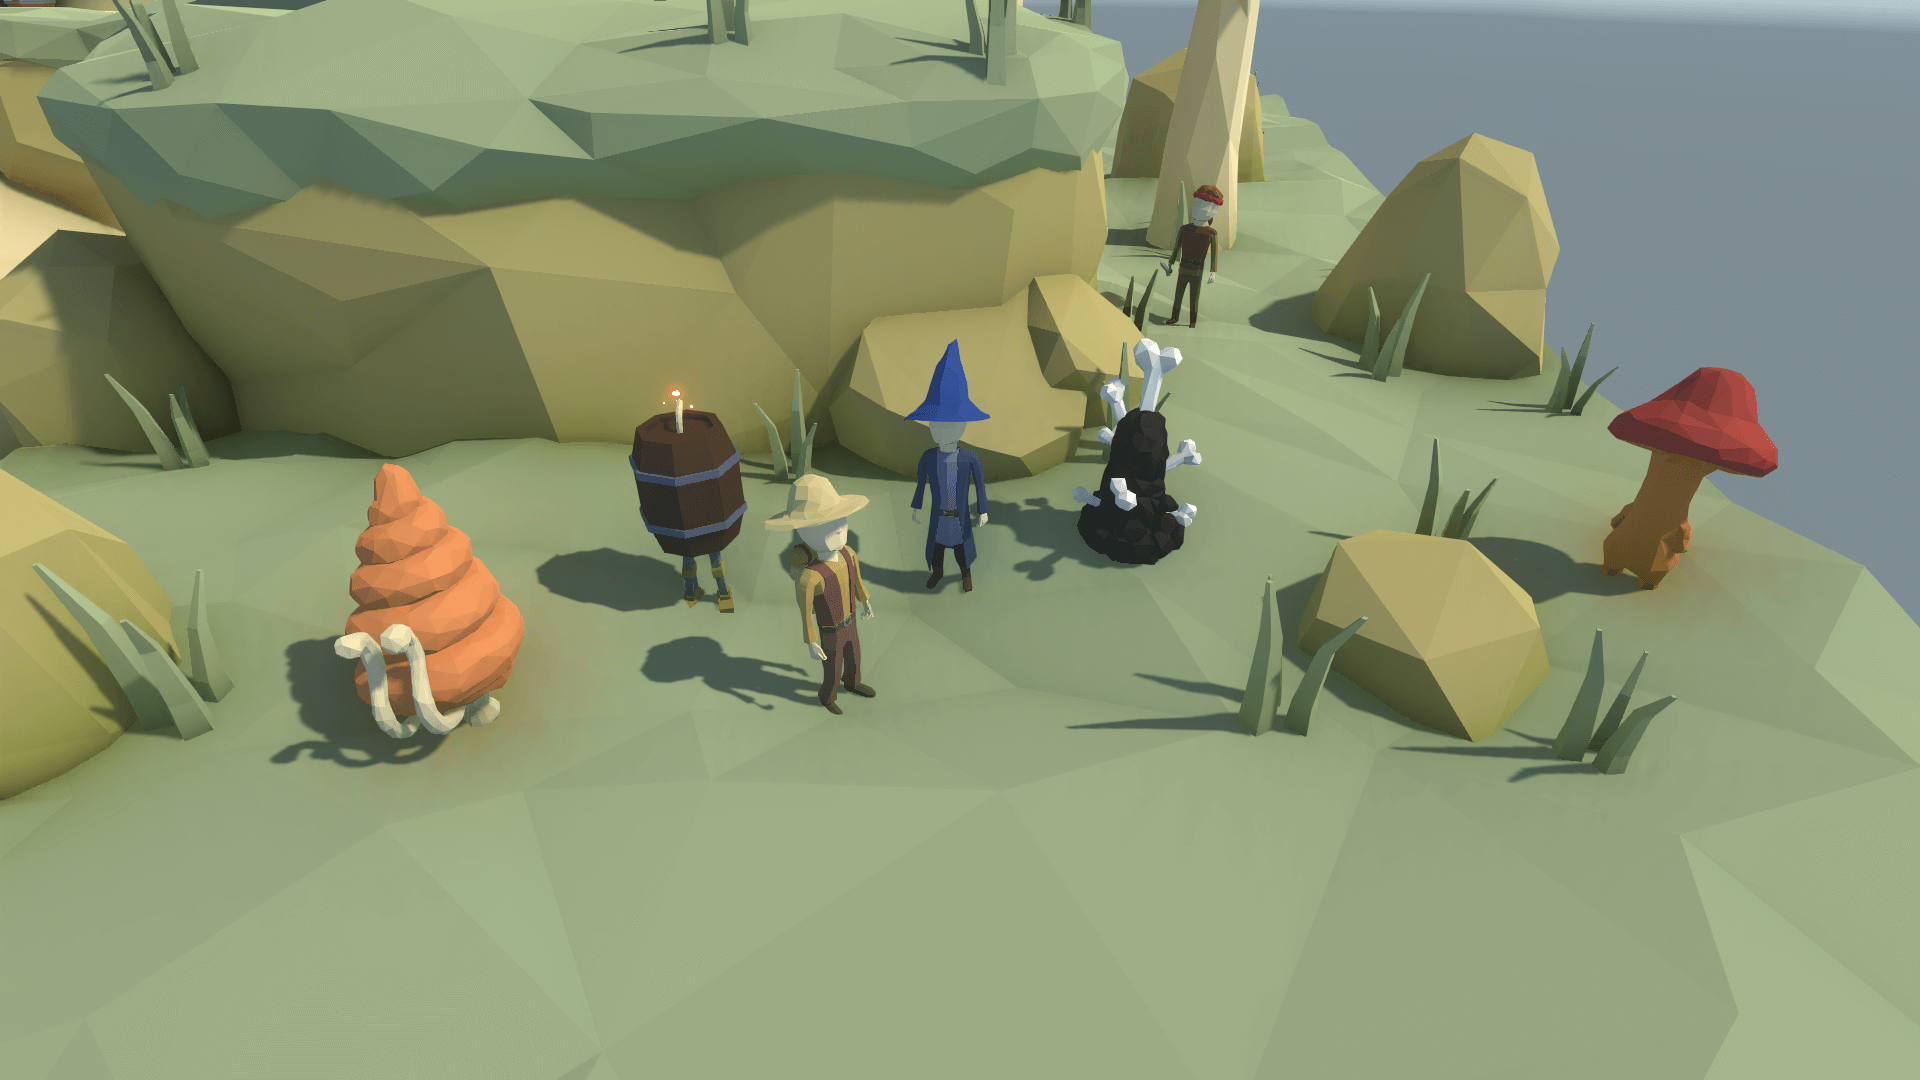 Some of the character types, including the mage, giant snail, traveler, and tar slime